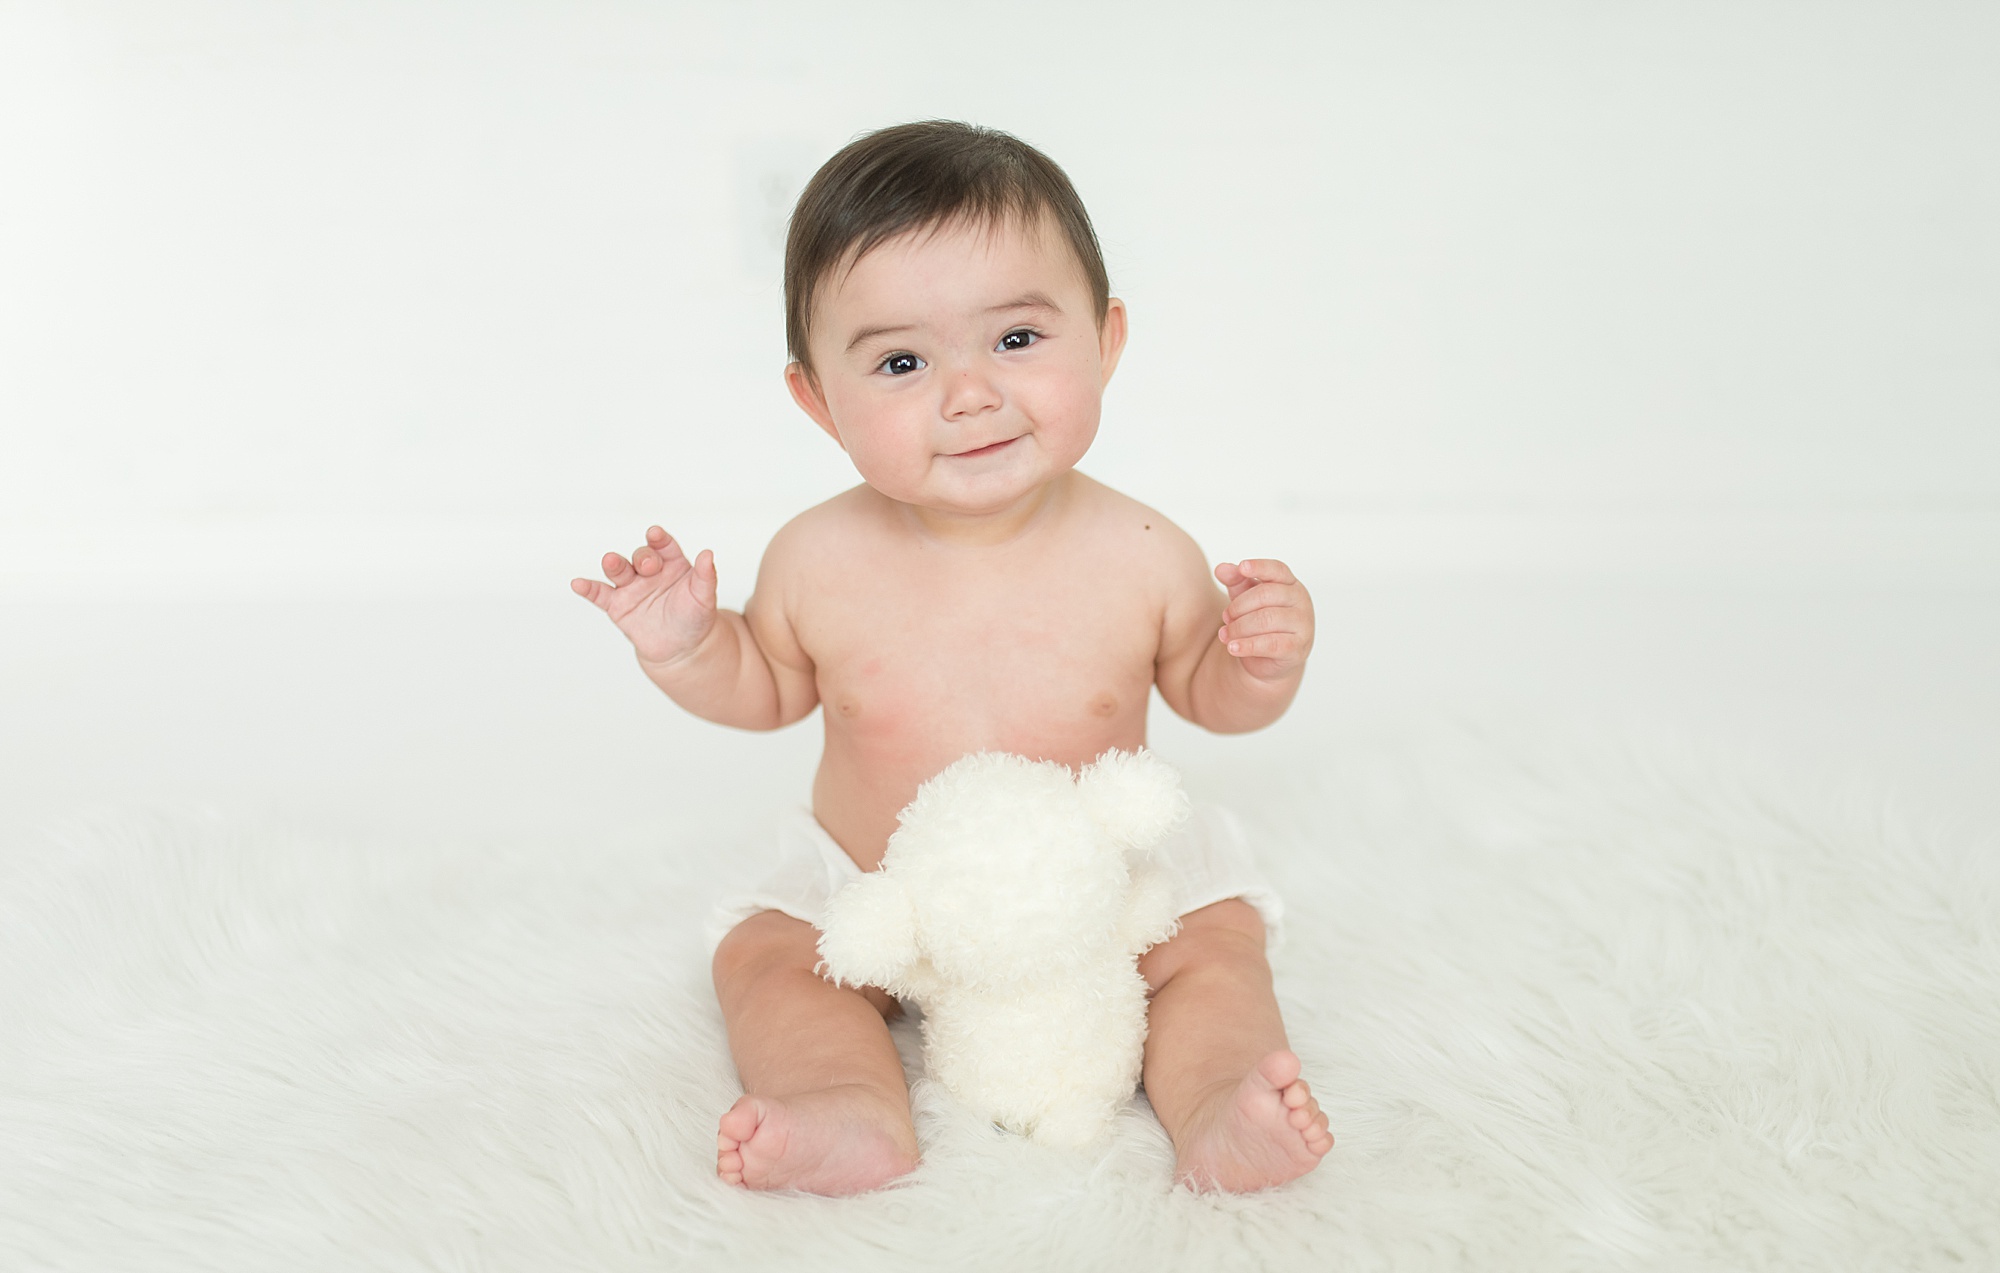 Little elm 6-month old smiles and plays with white stuffed animal 